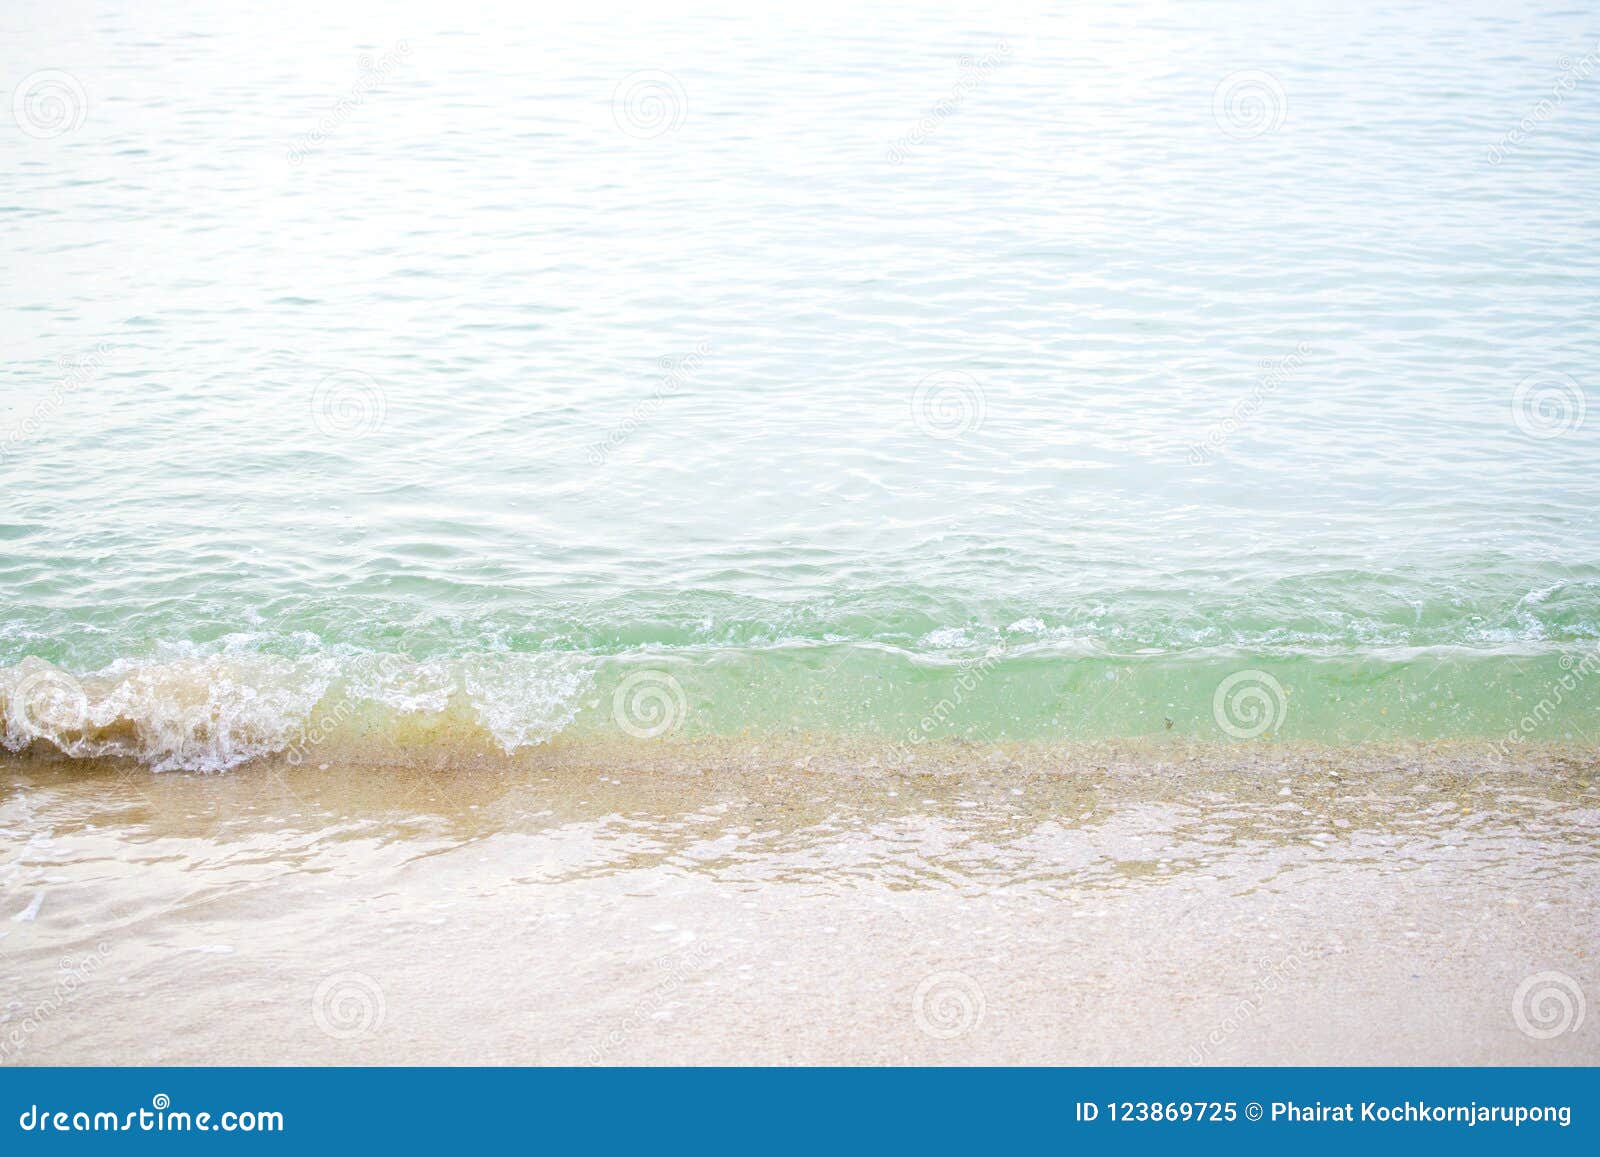 The Sea With Waves Hit The Sandy Beach Stock Image Image Of Coastal